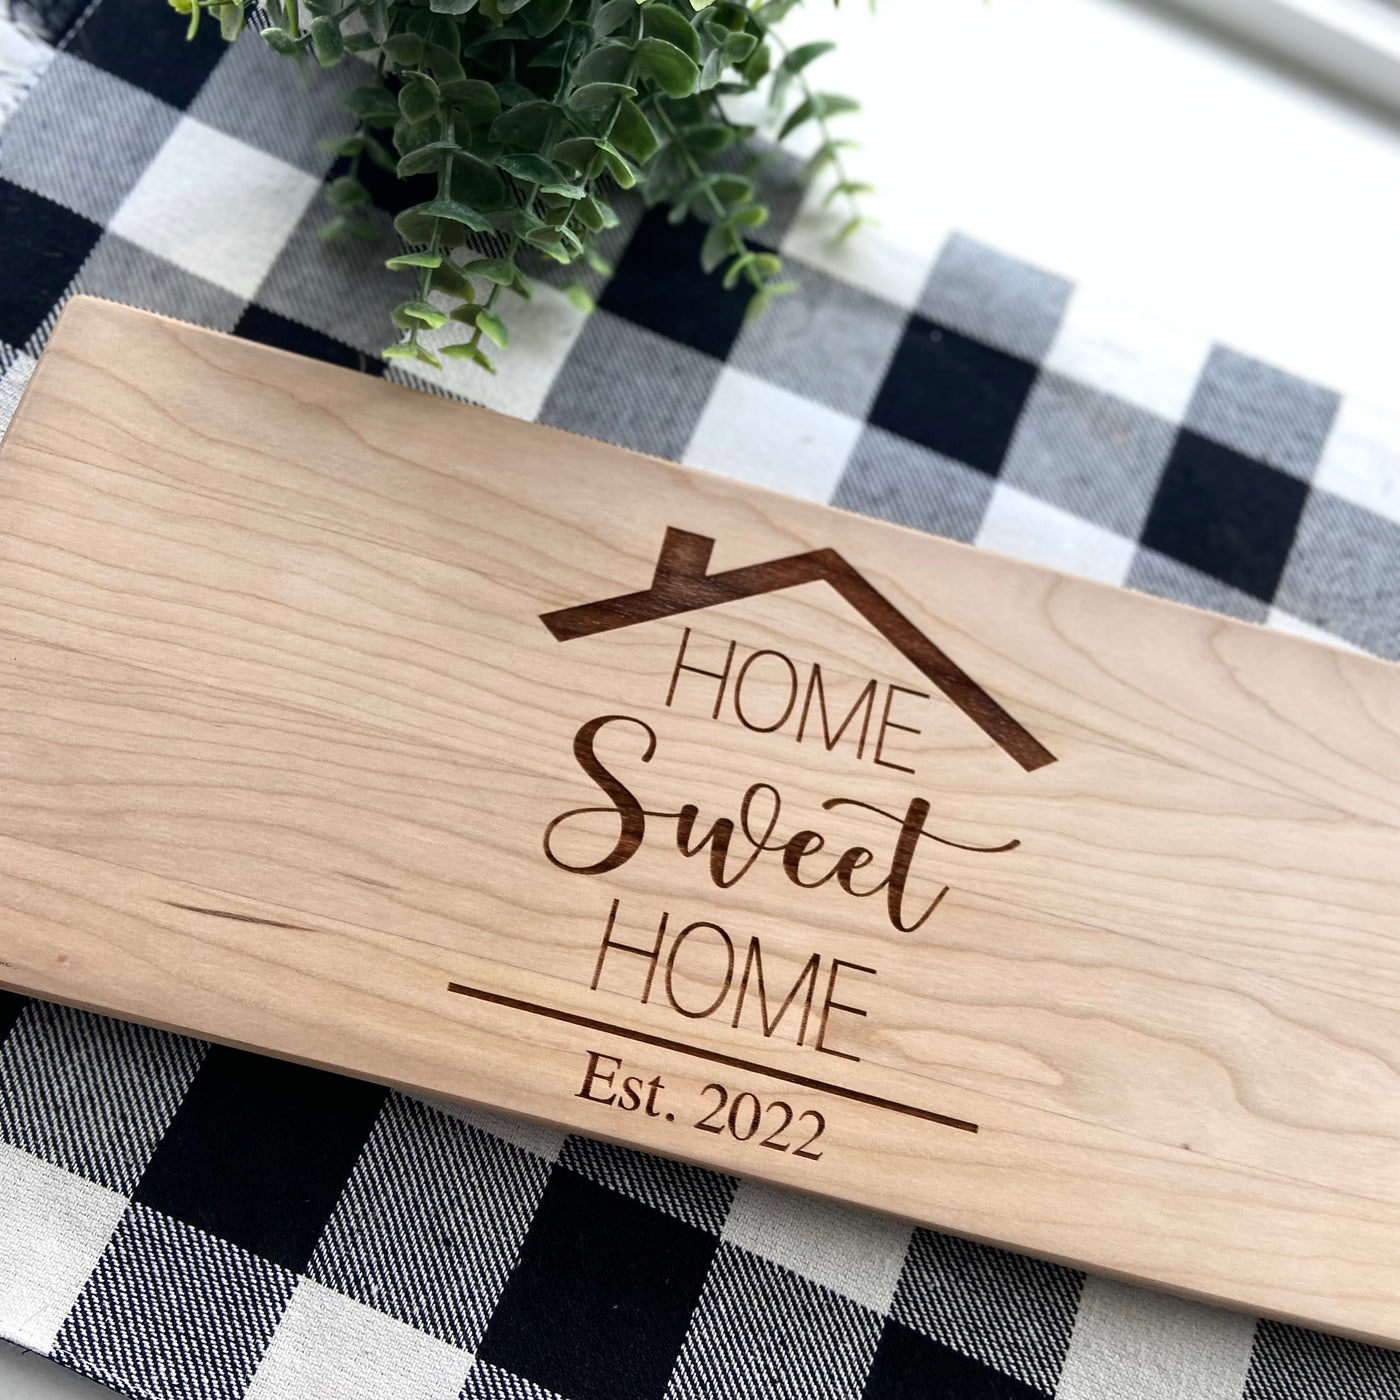 custom gifts, closing gifts, realtor, promotional, realtor gifts, real estate gifts, client gifts, customer gifts, home, housewarming, housewarming gift, thank you gift, charcuterie board, cutting board